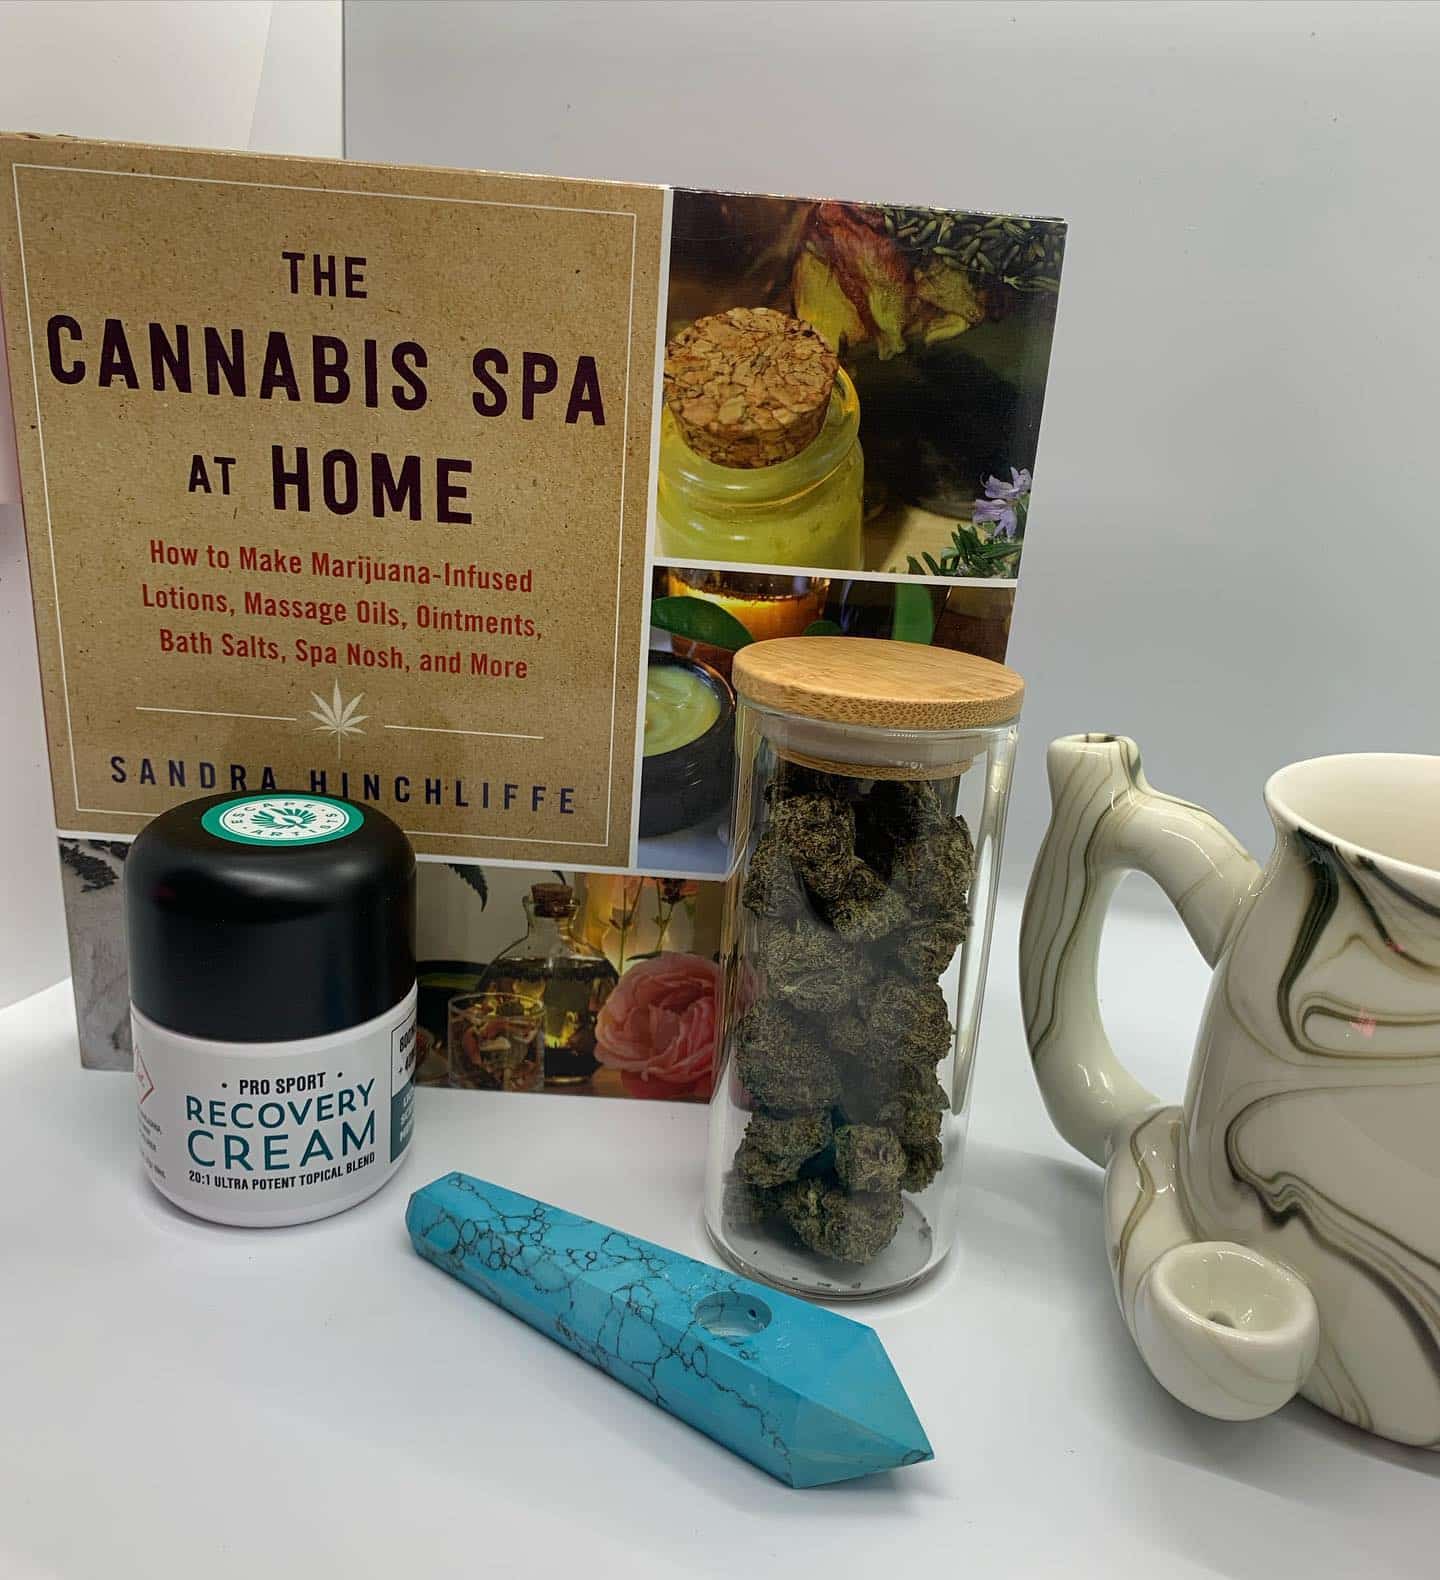 We all need a little me time, learn how to treat yourself to a relaxing afternoon. It can be as easy as smoking a bowl or making your own spa at home. The best part about the cannabis industry is there is something for everyone! #recreationalmarijuana #spaday #cortezcolorado #getdoobifiedresponsibly #shoplocal #coloradolife